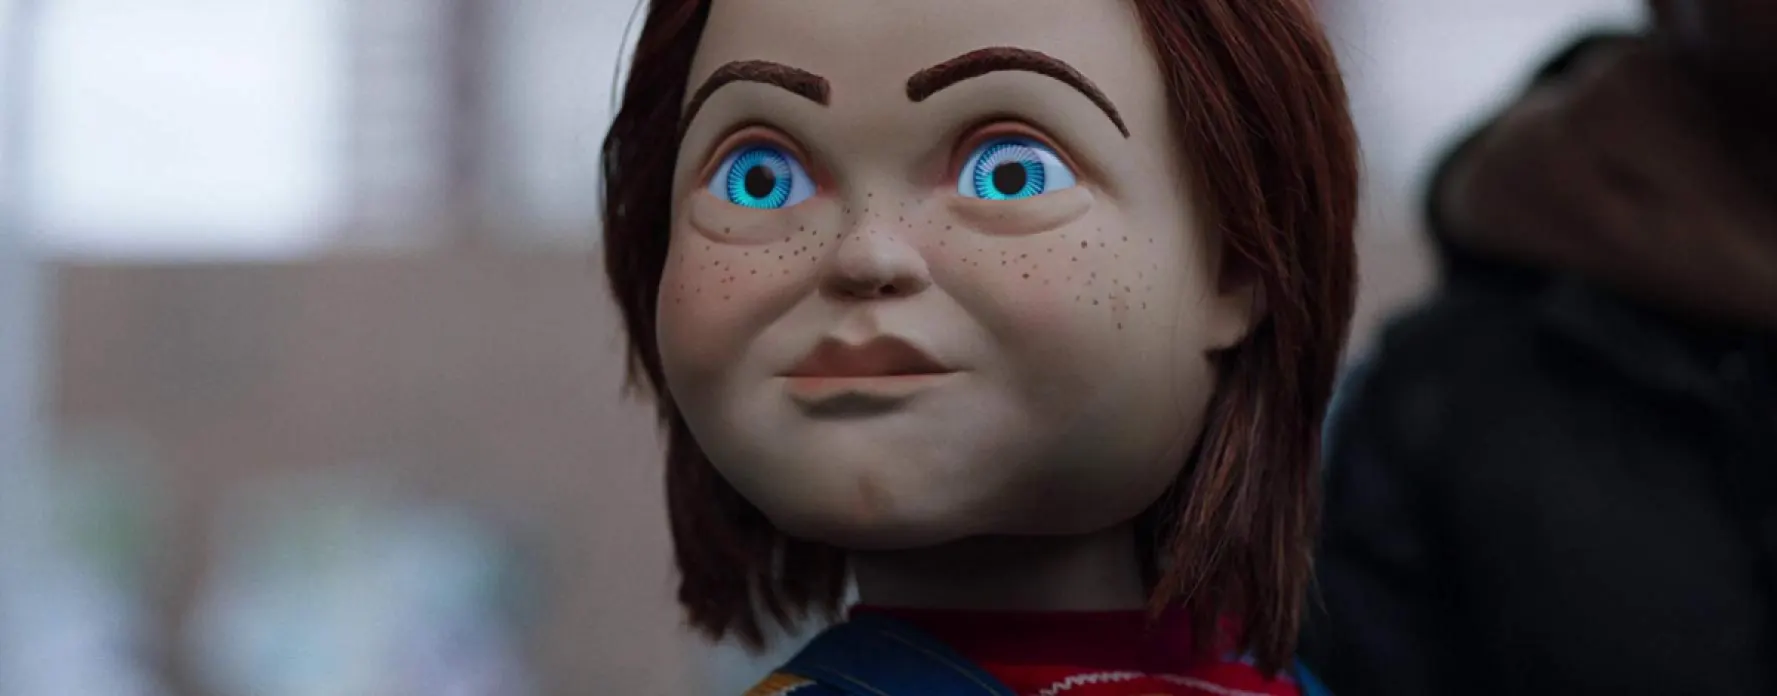 Chucky looking at someone in the Child's Play remake/reboot